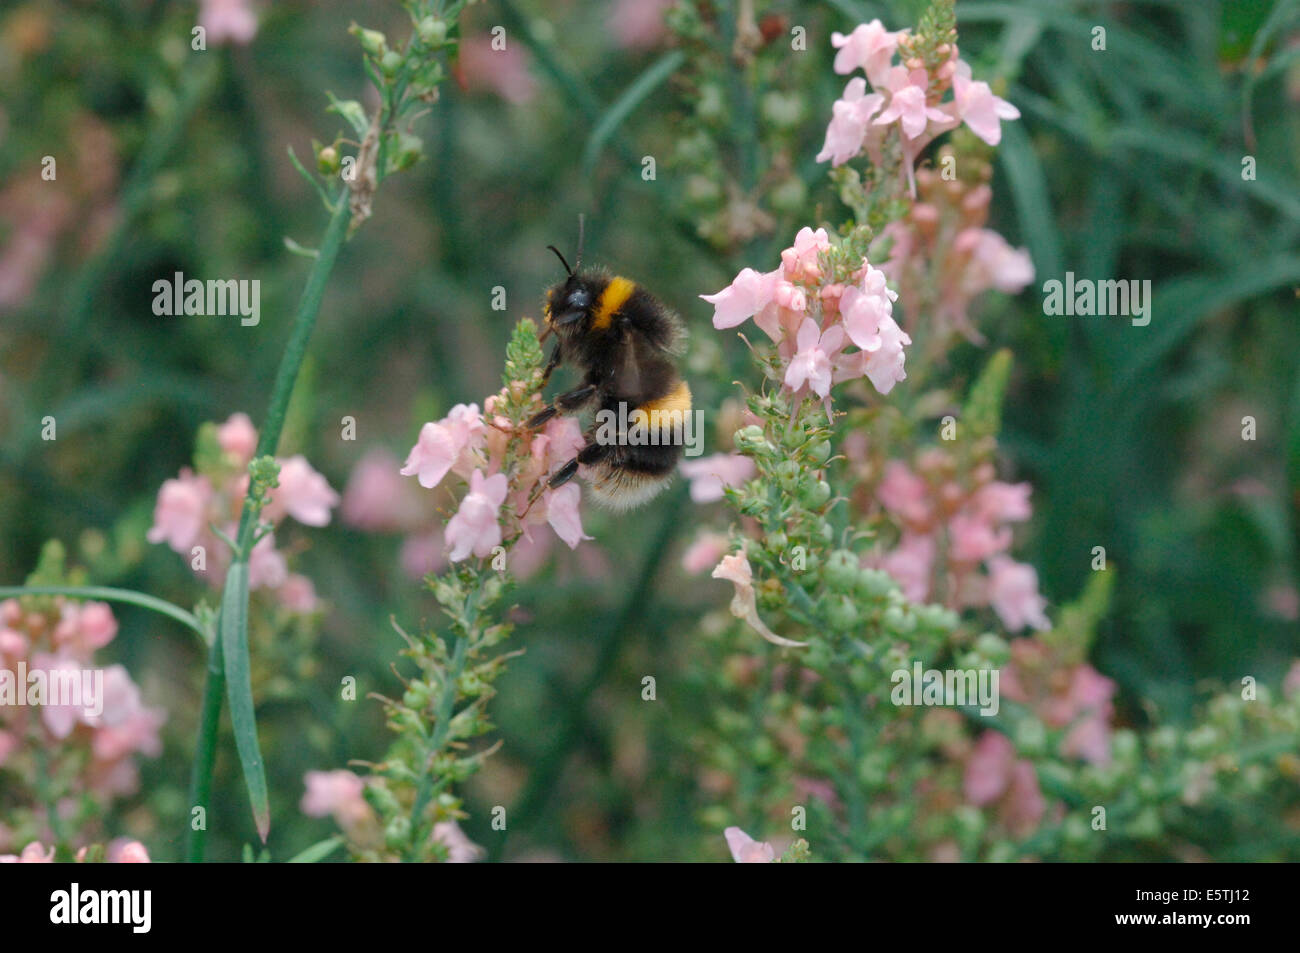 A Buff-Tailed Bumble Bee On A Pink Colored Flower.(Bombus terrestris). Stock Photo